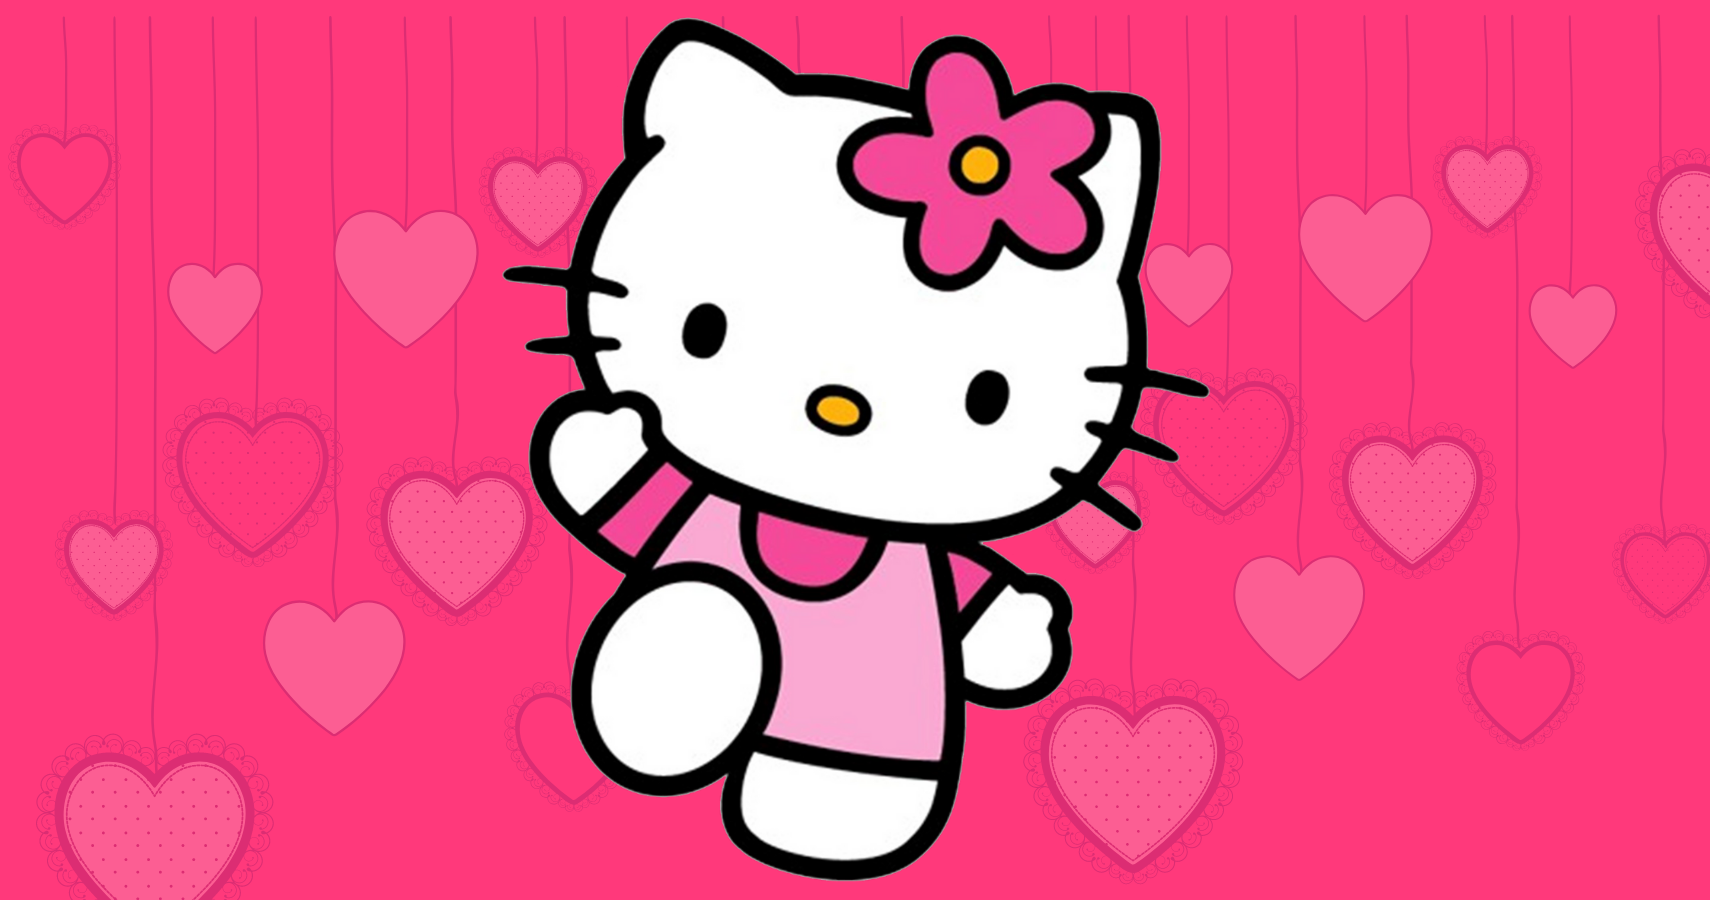  Hello  Kitty  Is Now On YouTube  With Inspiring Videos Moms com